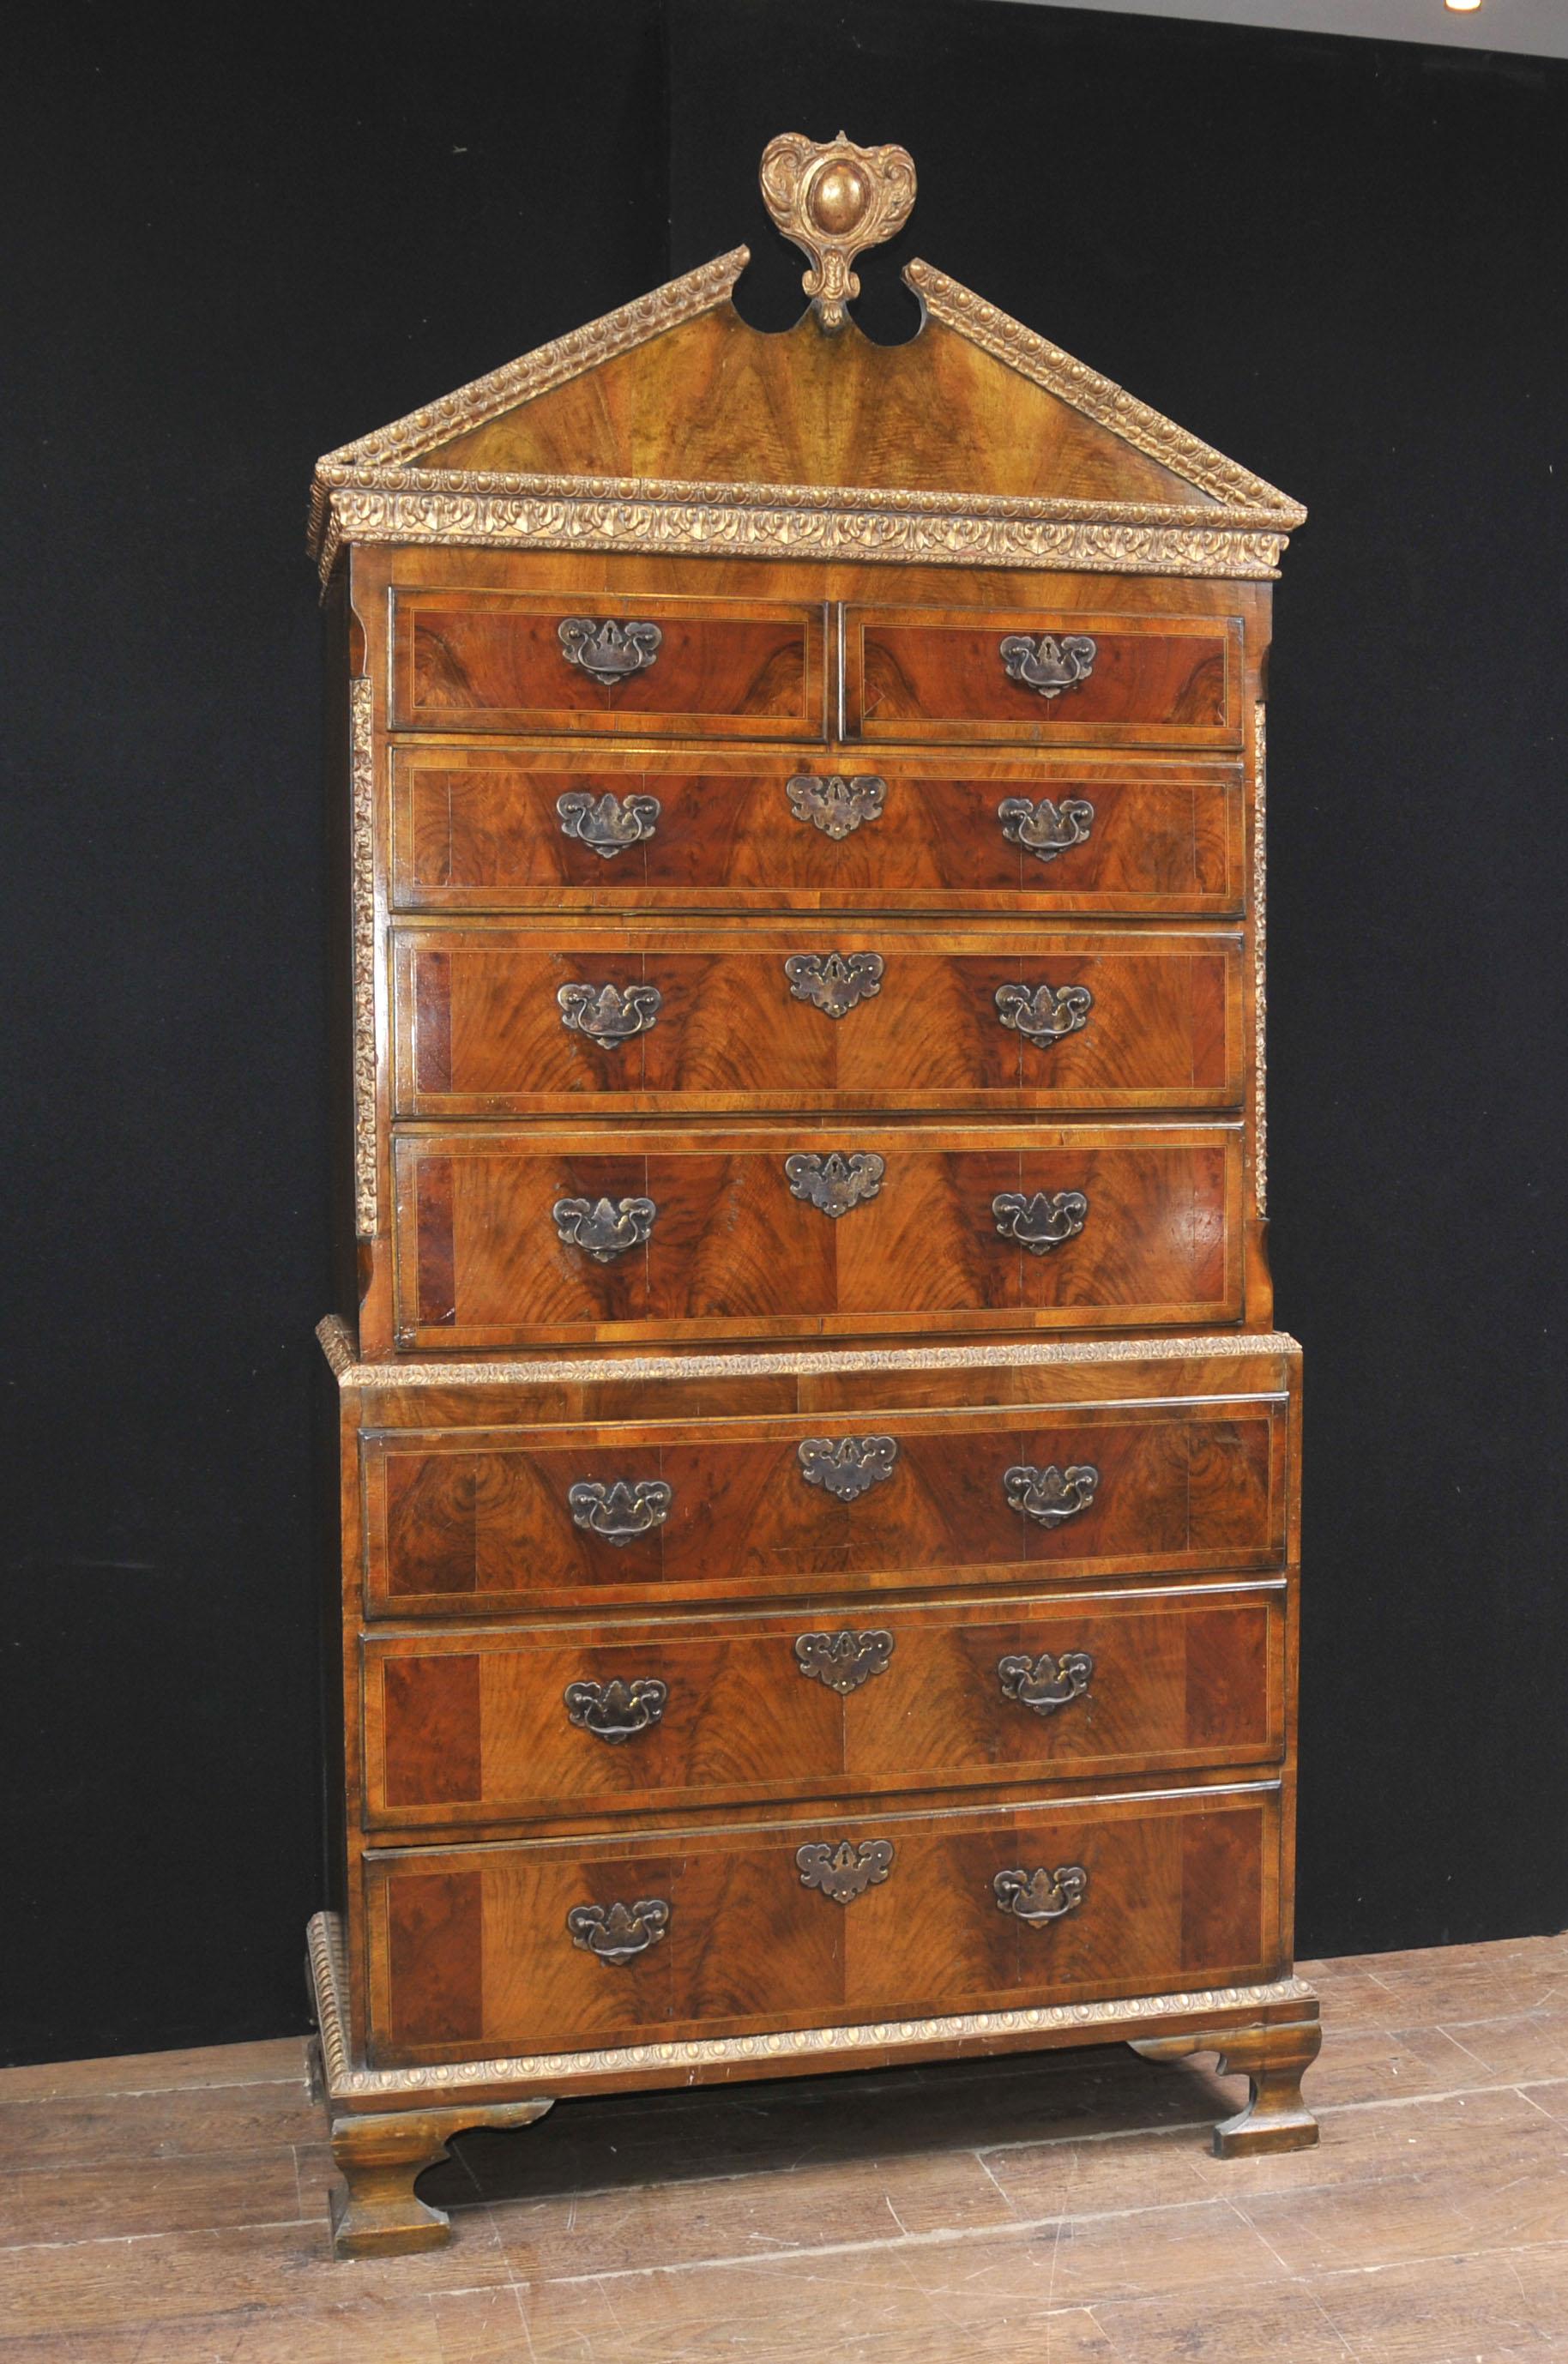 An impressive sized English burl walnut chest on chest dating to 1840 standing on ogee bracket feet, the top pediment is in a triangular form and is surmounted by a parcel-gilt motif, this parcel-gilt decoration is continued down on to the canted